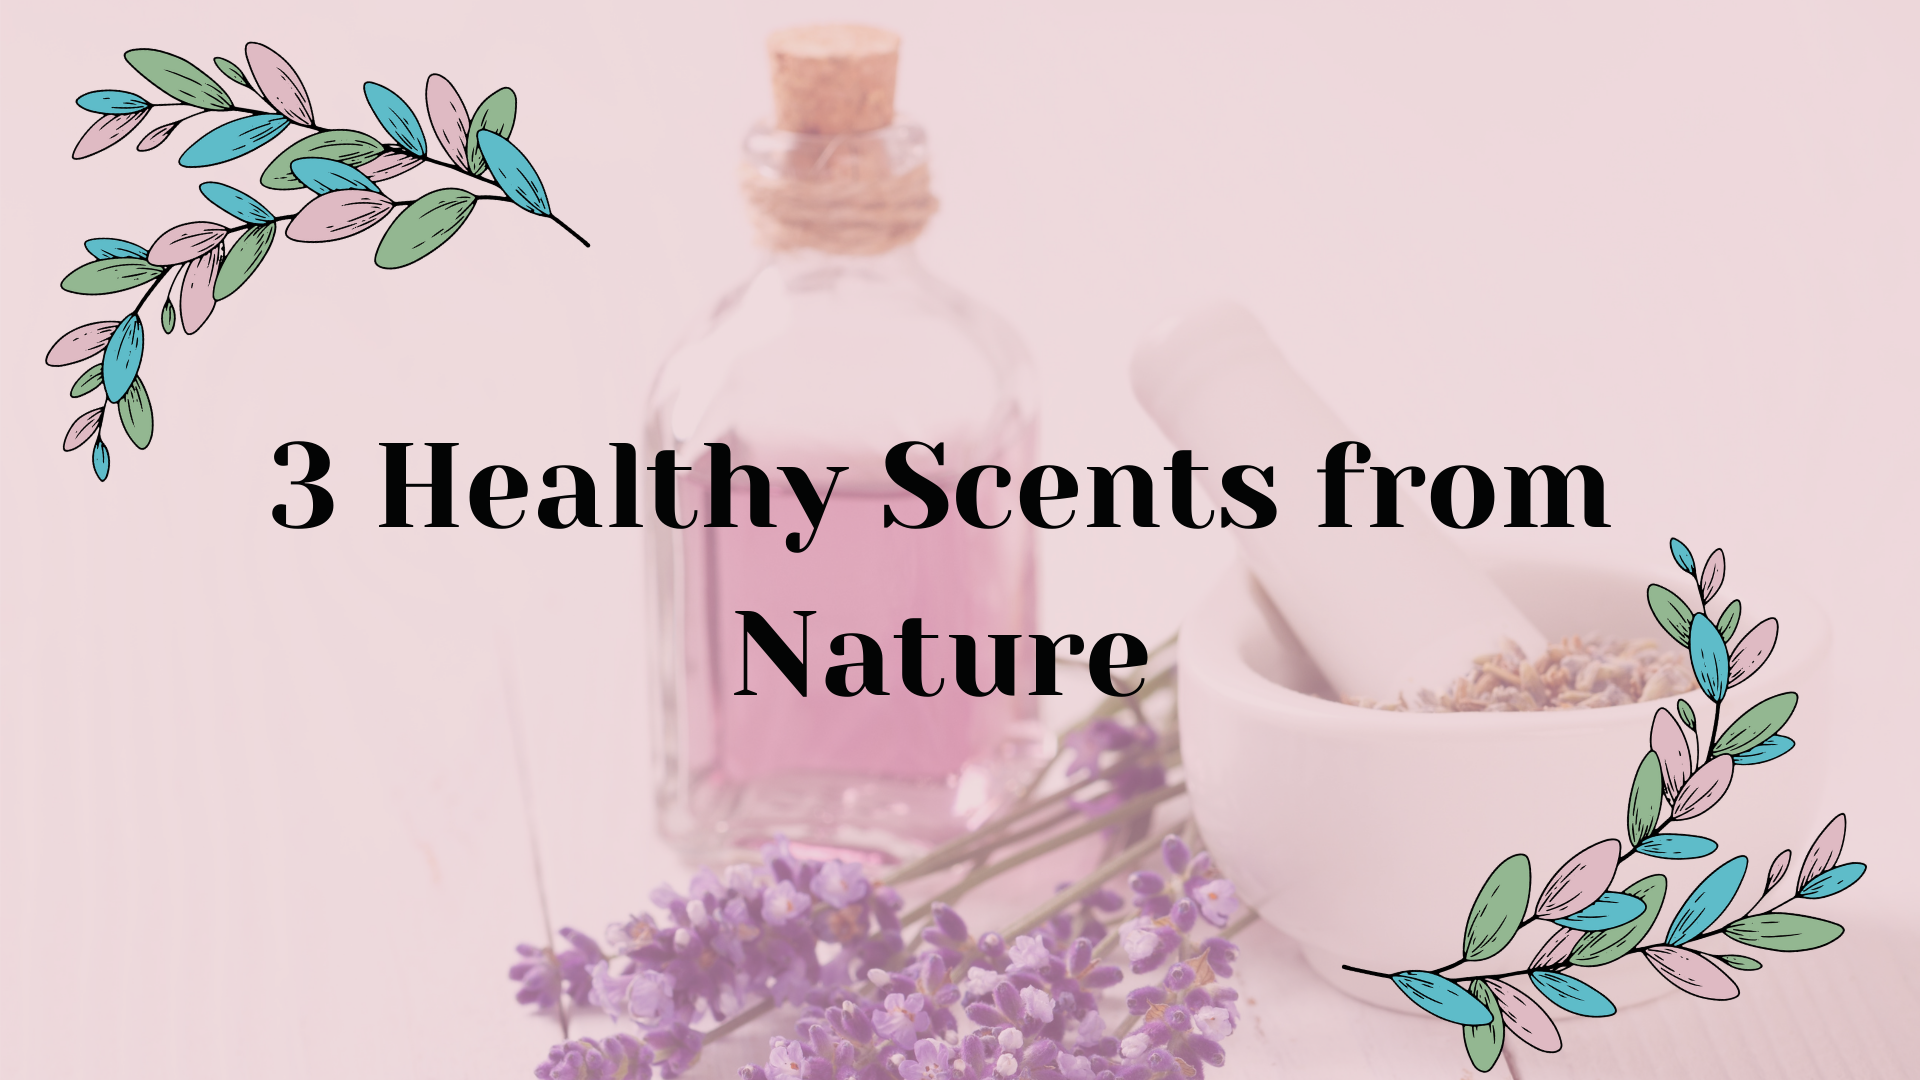 4 Healthy Scents From Nature